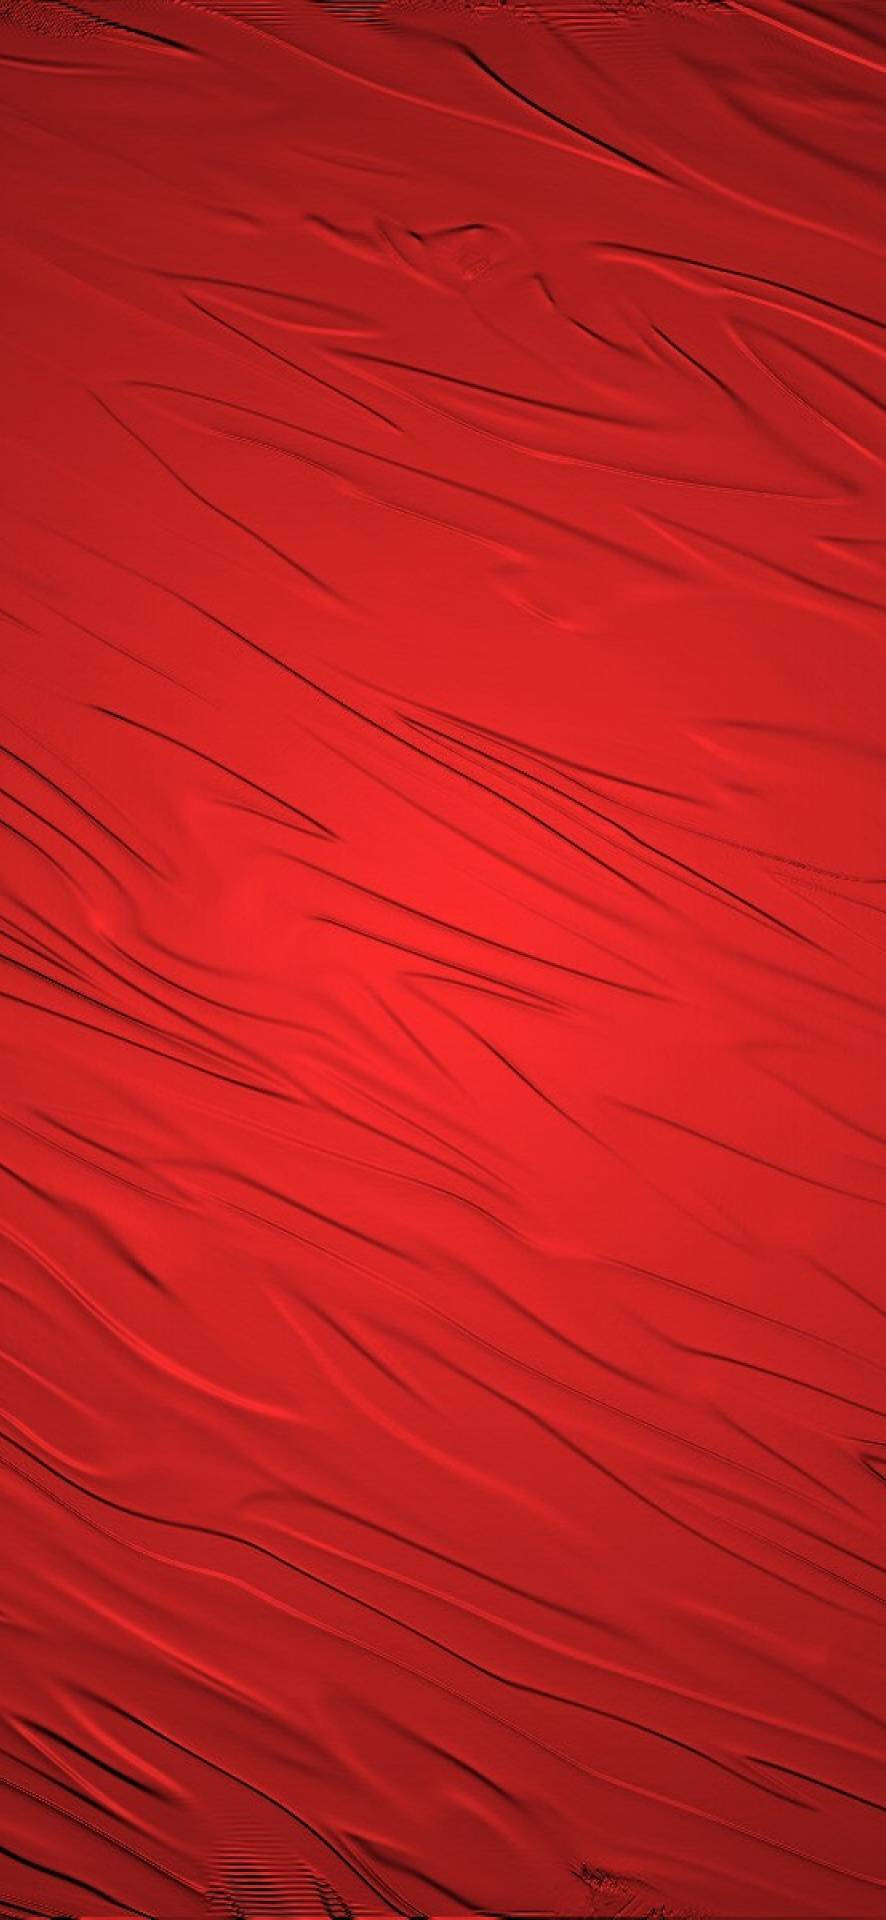 Pure Red Textured Cloth Surface Background